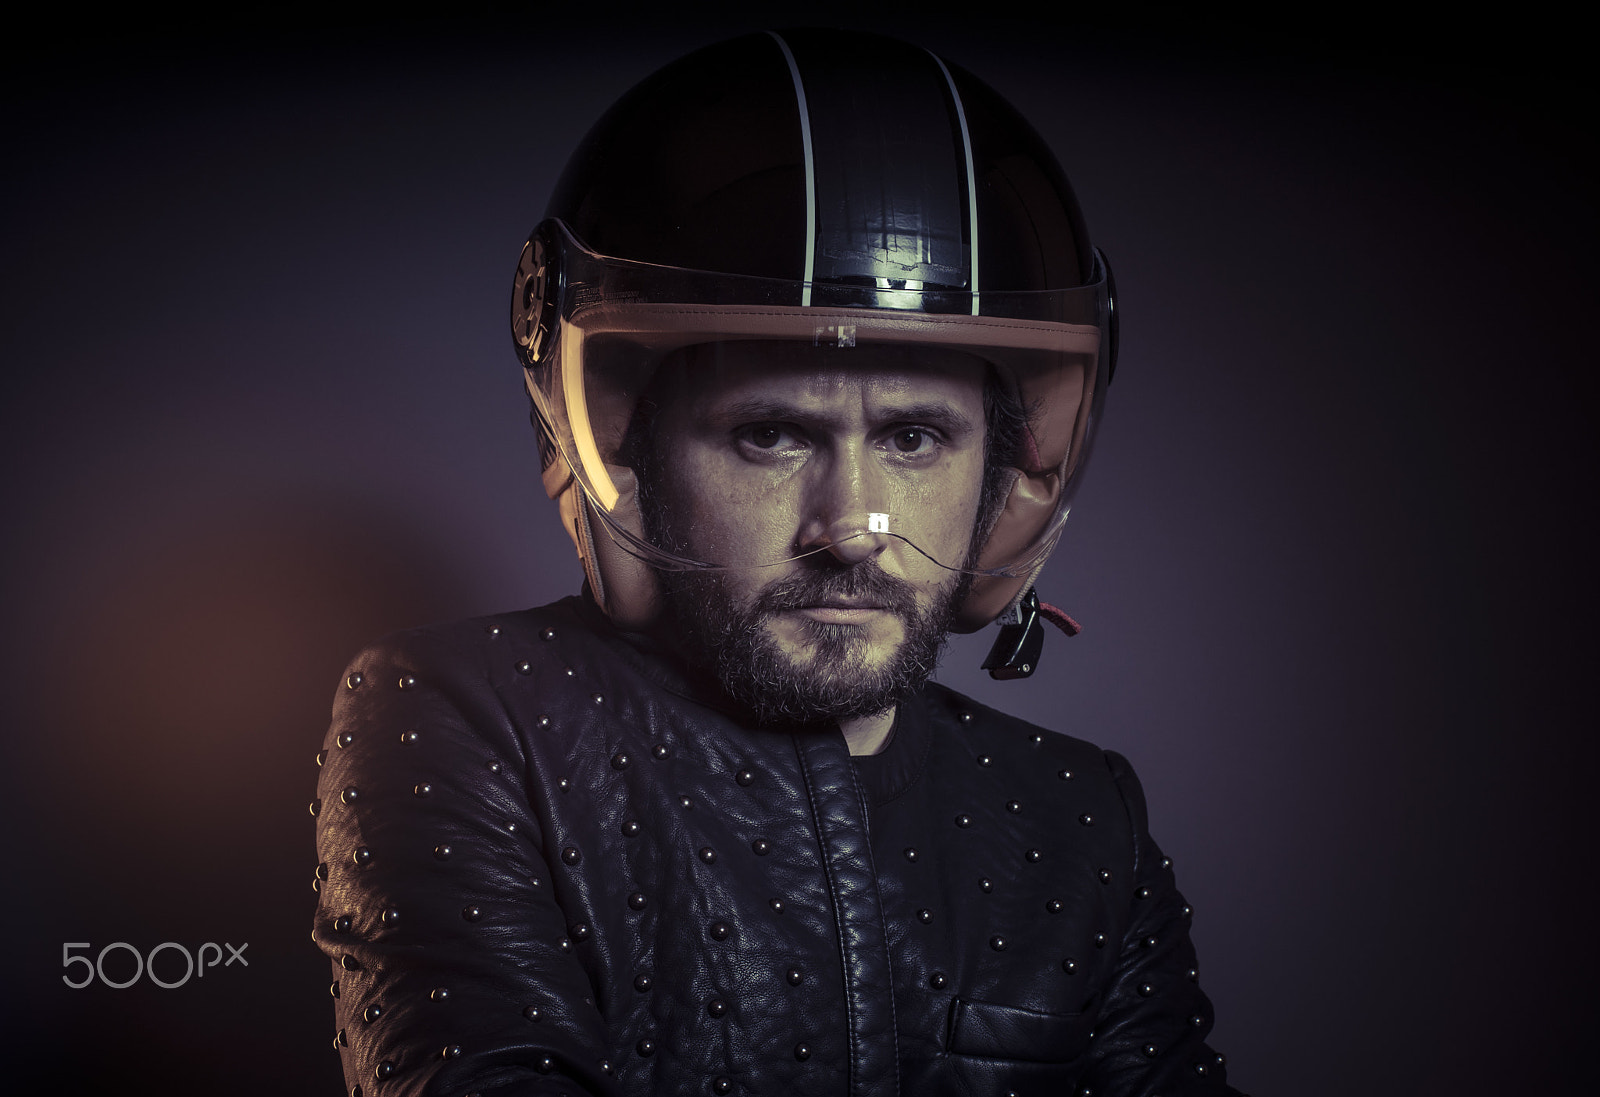 Sony a7 + Sony DT 50mm F1.8 SAM sample photo. Trip, biker with motorcycle helmet and black leather jacket, met photography